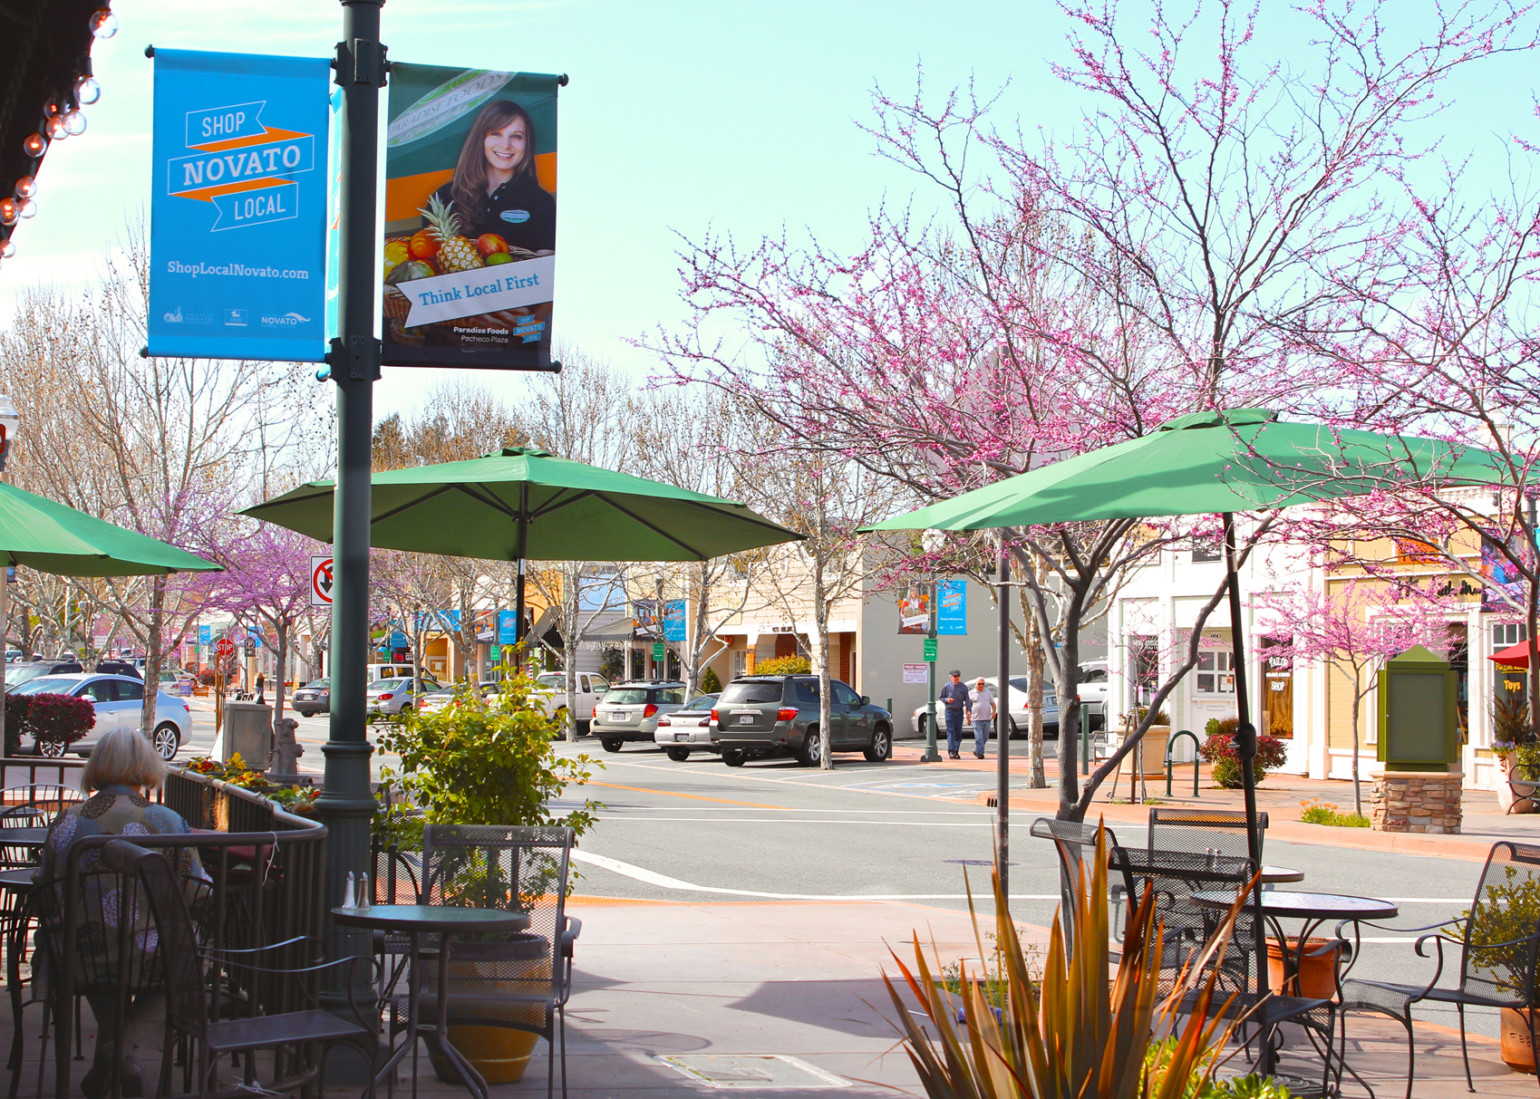 Shops and businesses on the corner in downtown Novato